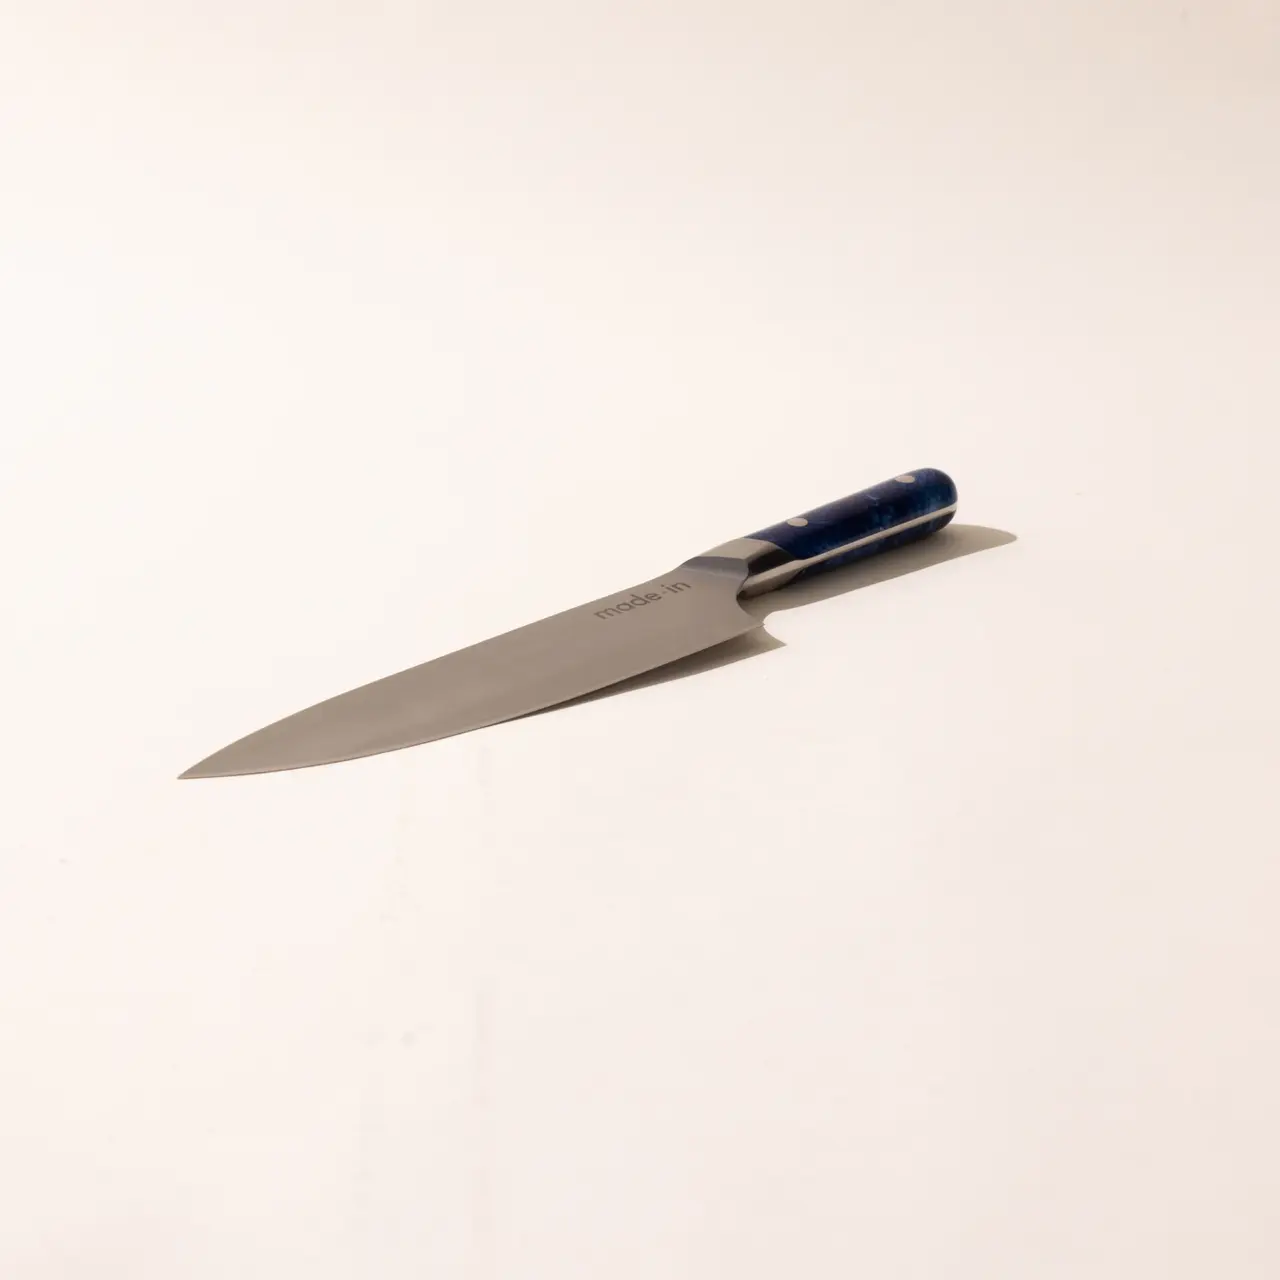 A kitchen knife with a blue handle lying on a plain white surface.